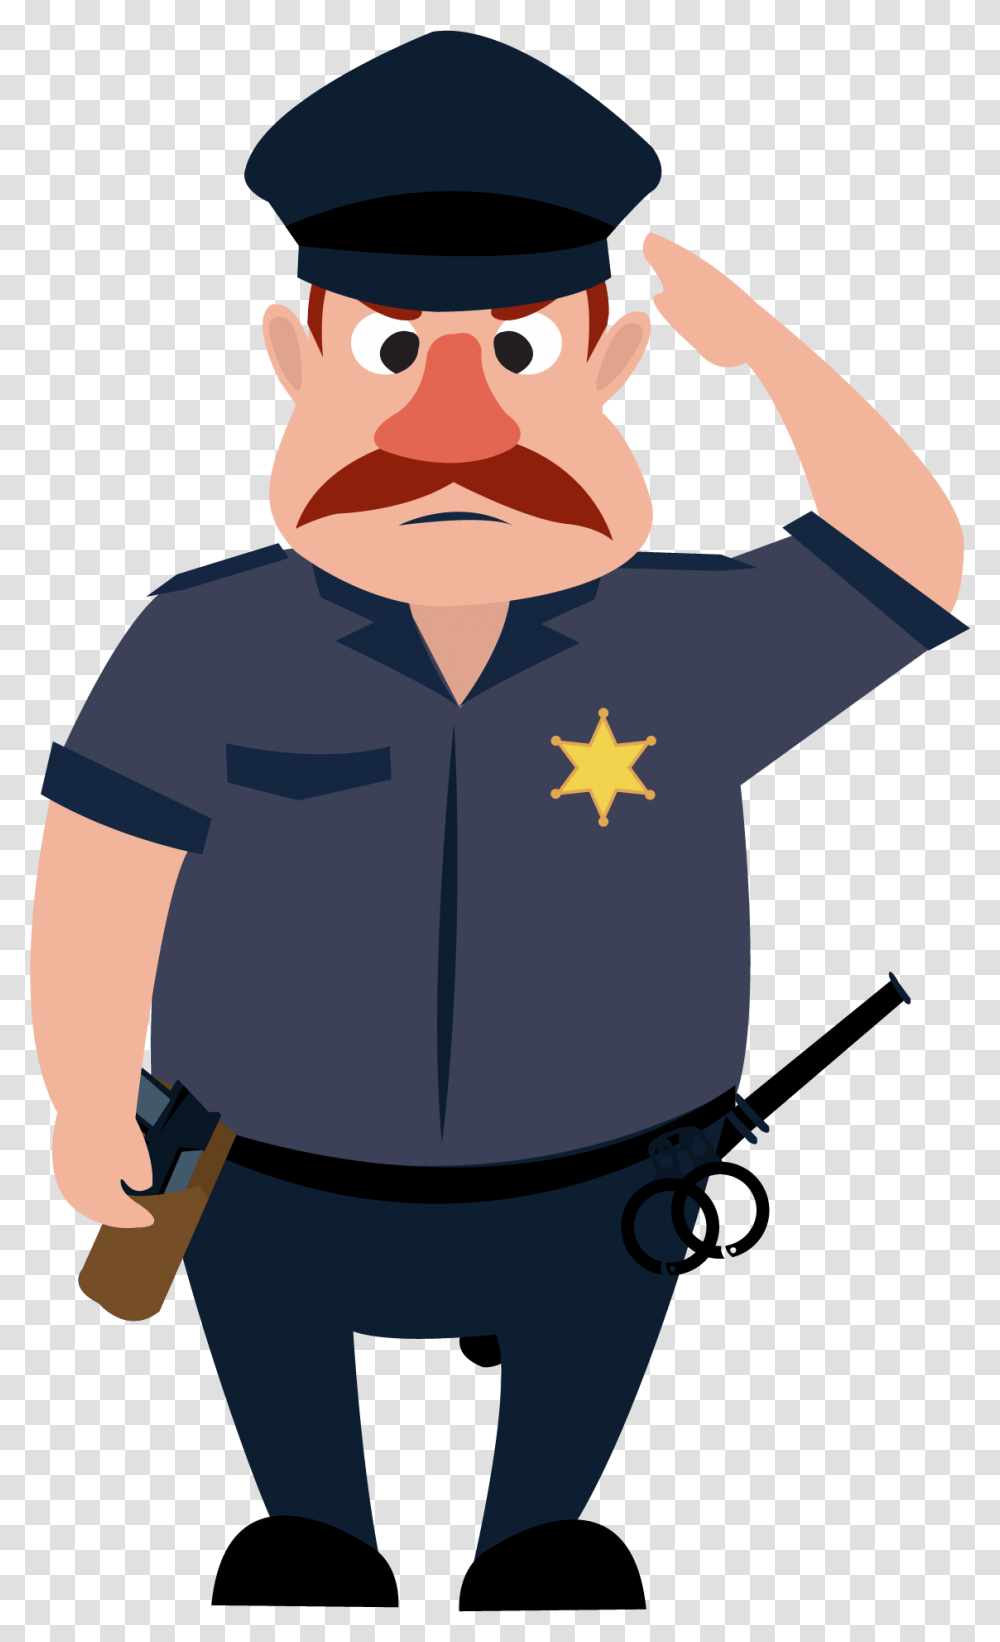 Svg Download Police Officer Police Dog Police Car Police Officer Cartoon, Person, Human, Face, Military Uniform Transparent Png